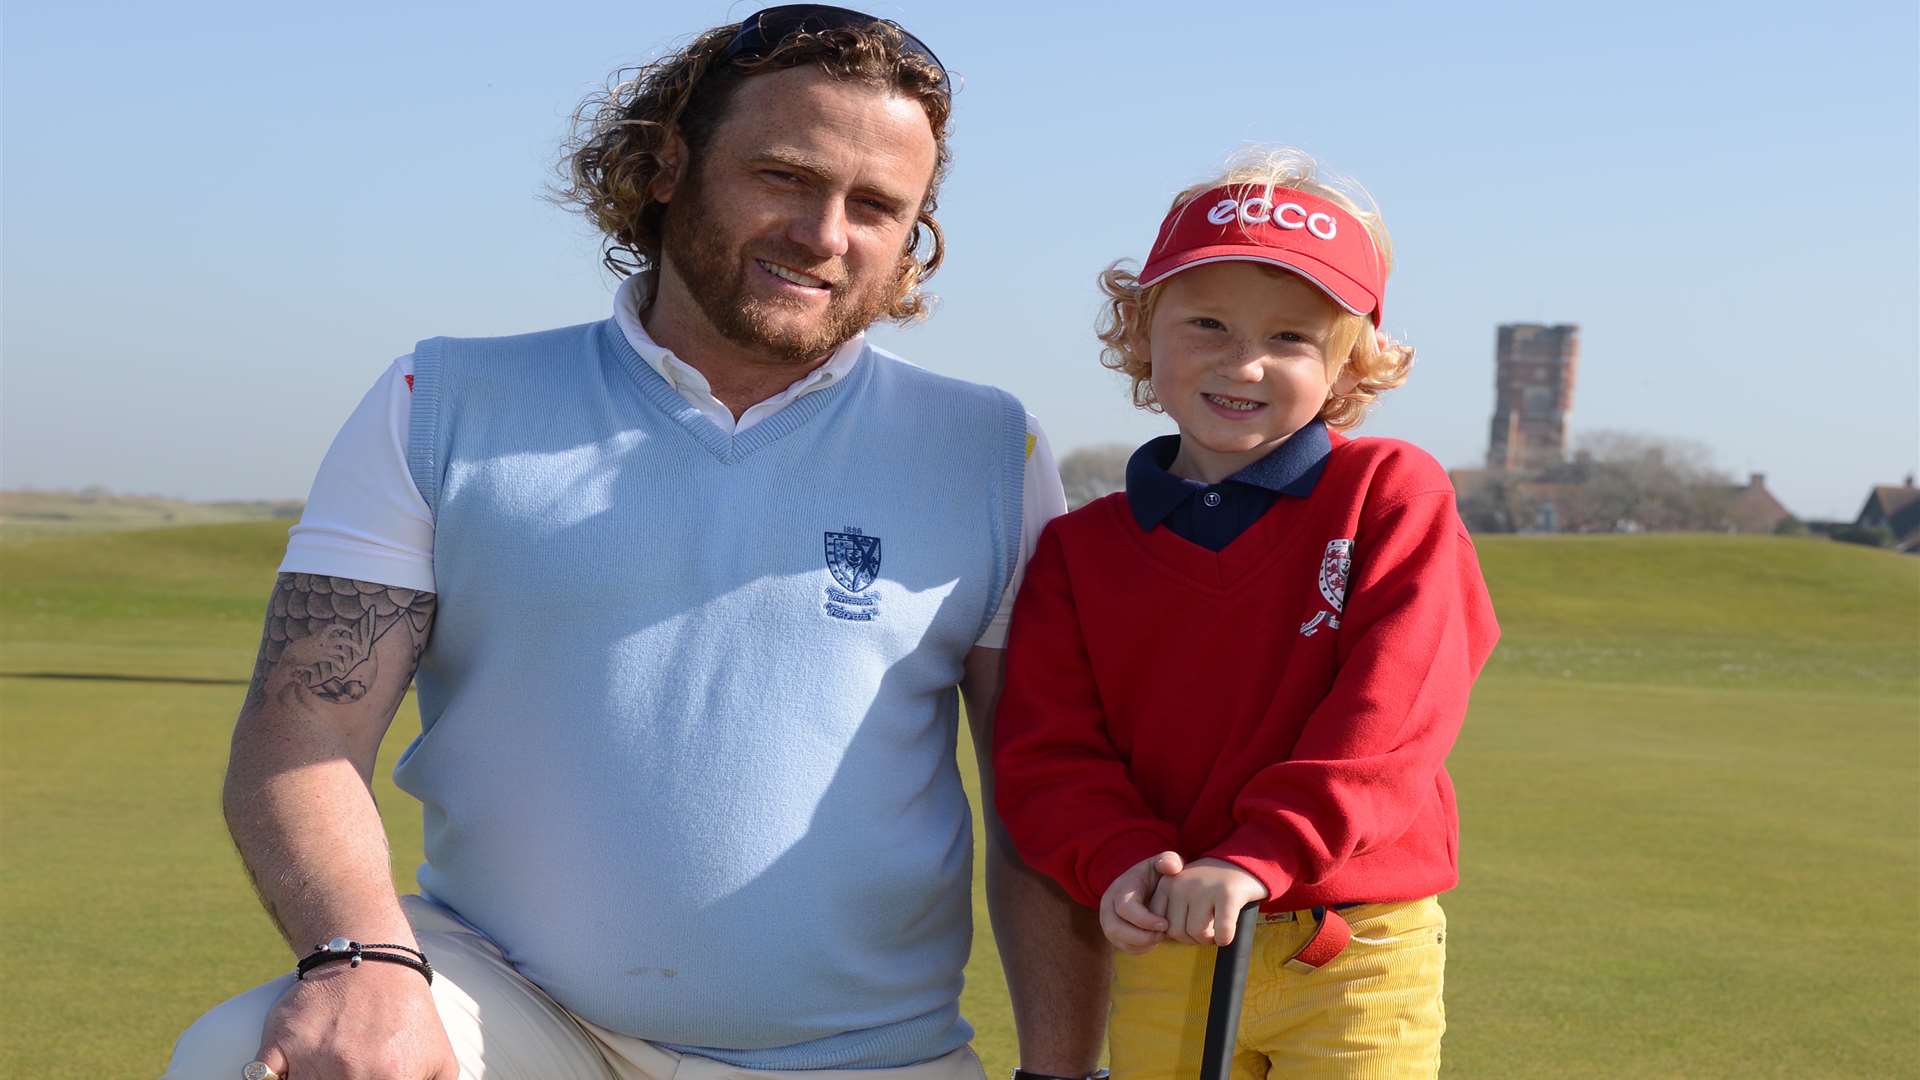 Arthur Saunders, five, who is going to compete in a USA golfing championship with dad Kevin. Picture: Gary Browne